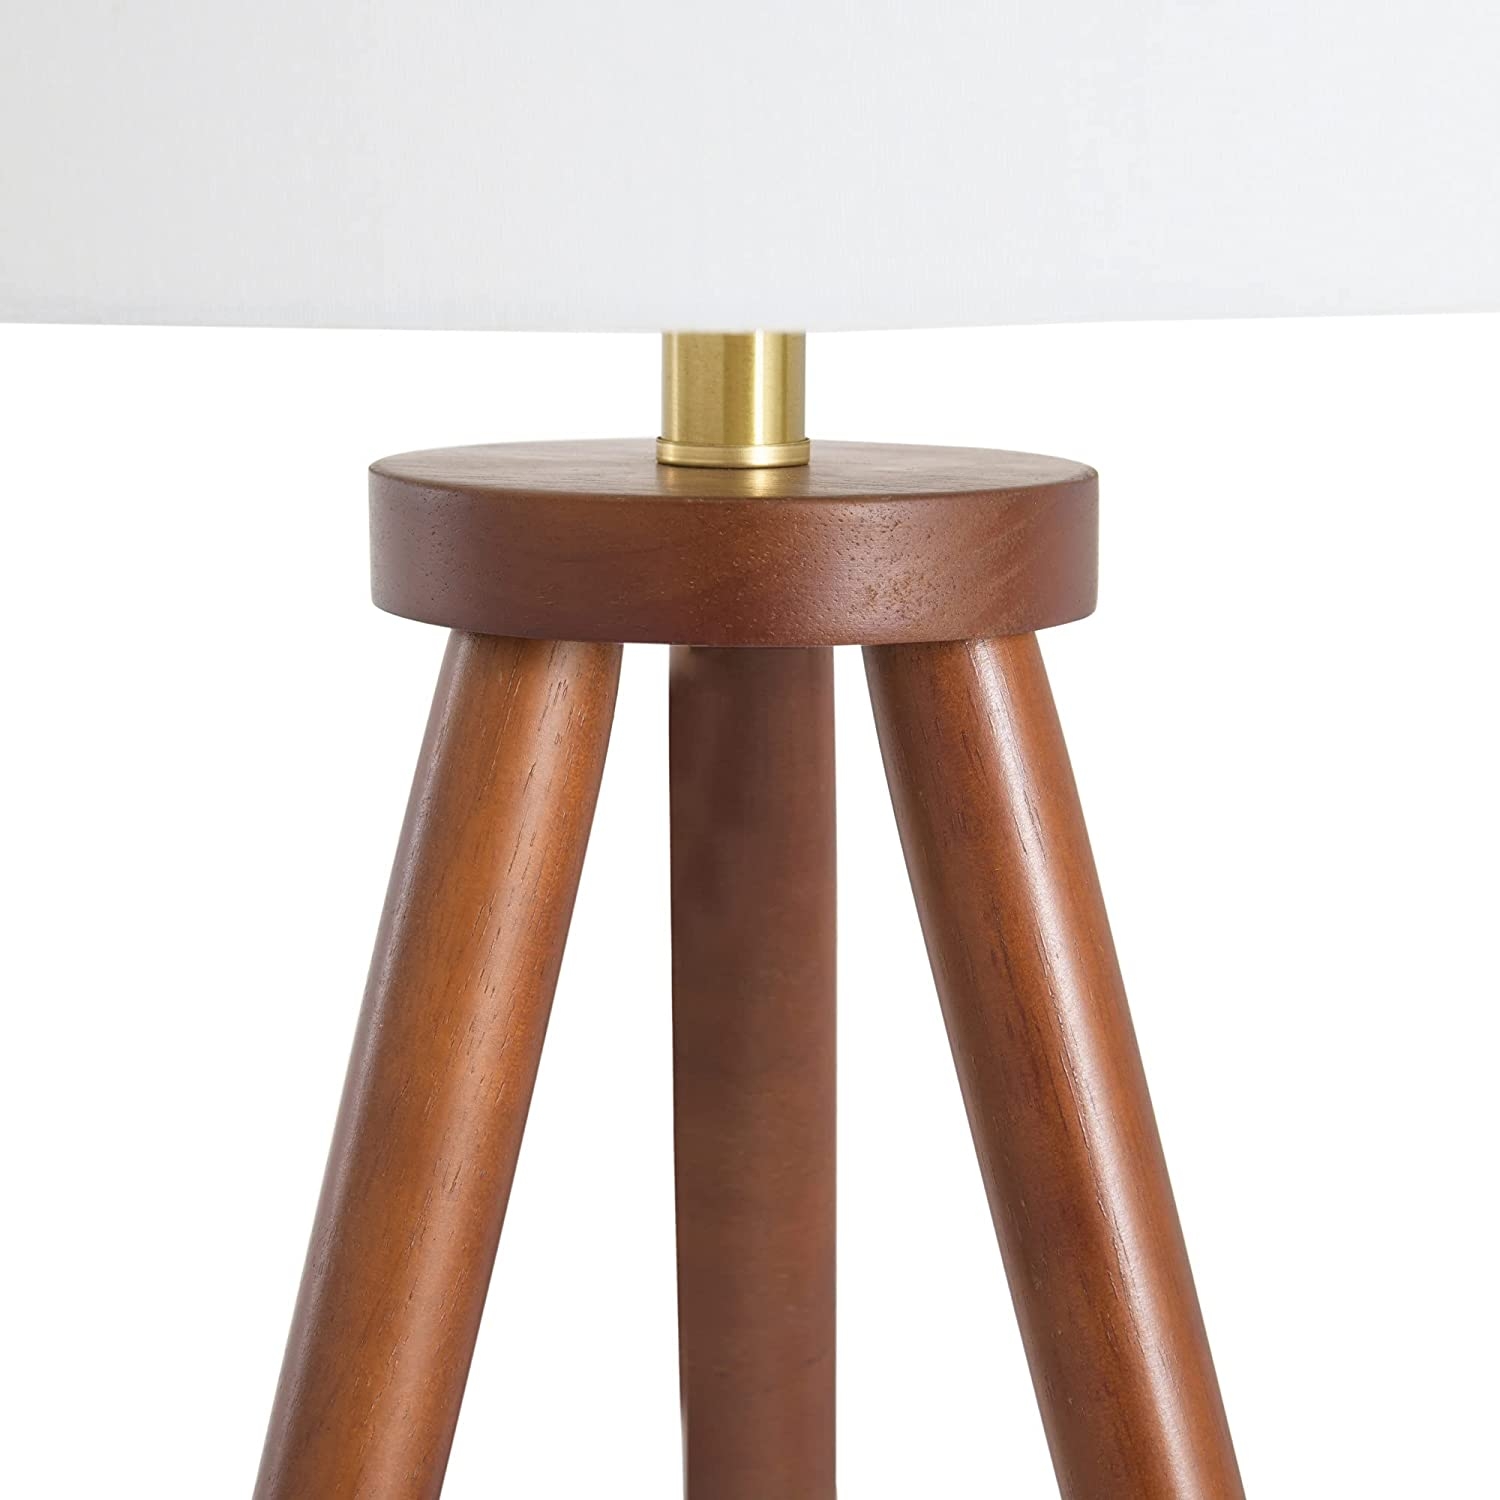 A-Frame Tripod Rubber Wood Floor Lamp with Cream Linen Shade, Espresso - Image 2